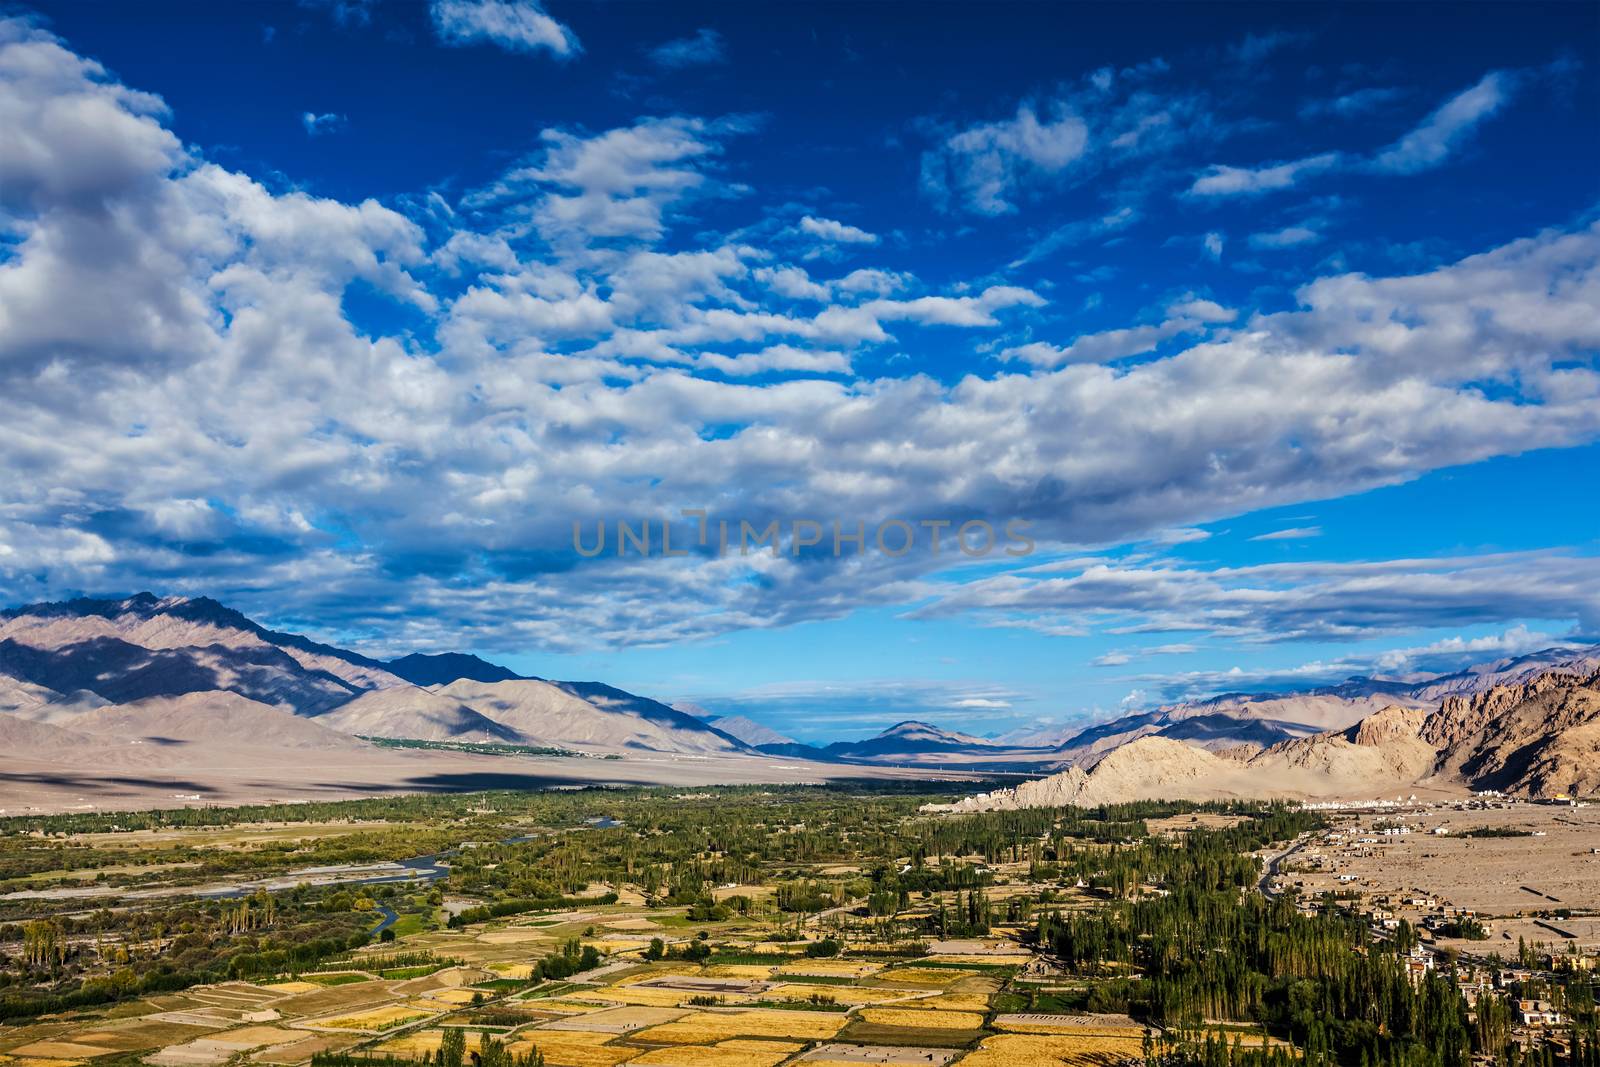 Himalayan landscape of historic Indus valley surrounded by Karakoram range of Himalaya mountains. View from Buddhist temple Thiksey gompa. Ancient civilization of Bronze Age South Asia. Ladakh, India